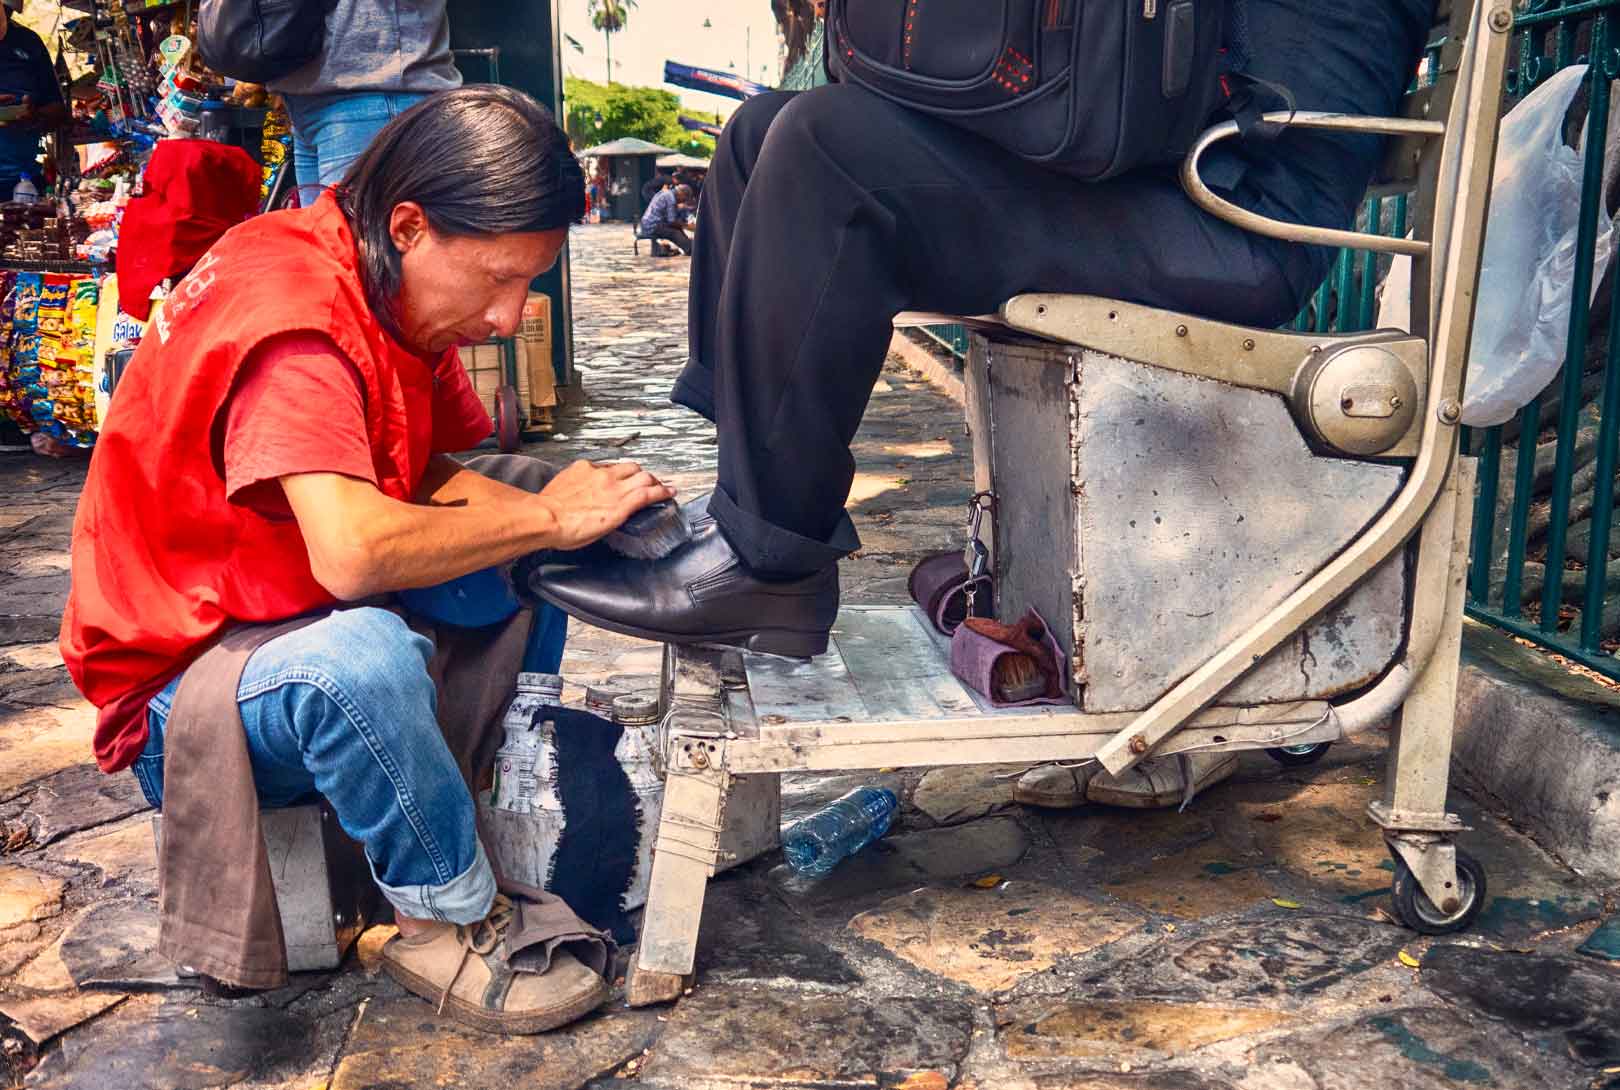 shoe shine vendor in red shirt shining man's shoes on street near Parque Seminario Park in Guayaquil